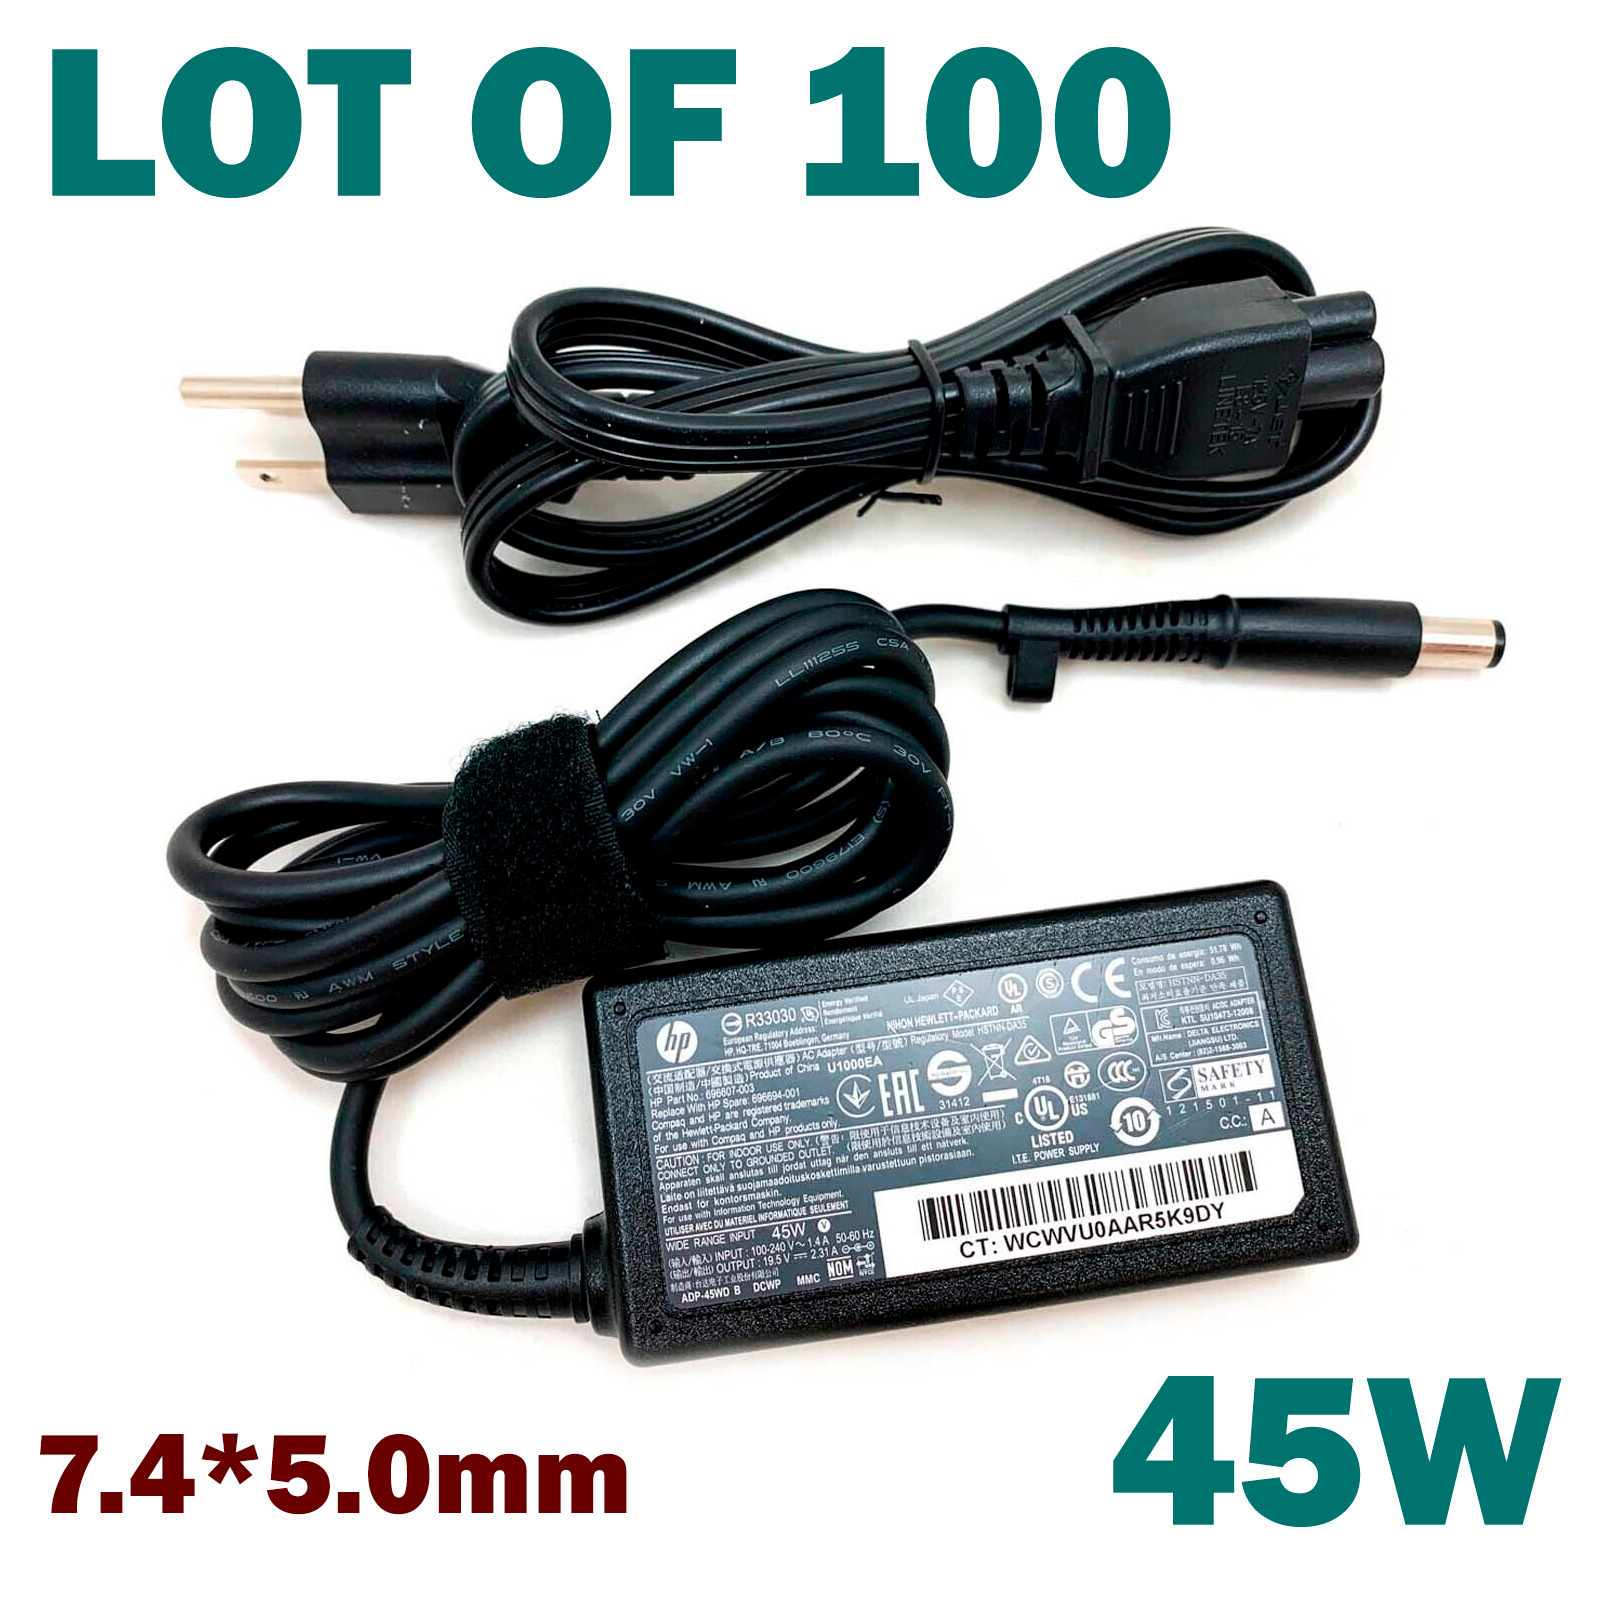 Lot of 100 Genuine 45W HP AC Power Supply Adapter 19.5V 2.31A 7.4*5.0mm & Cord